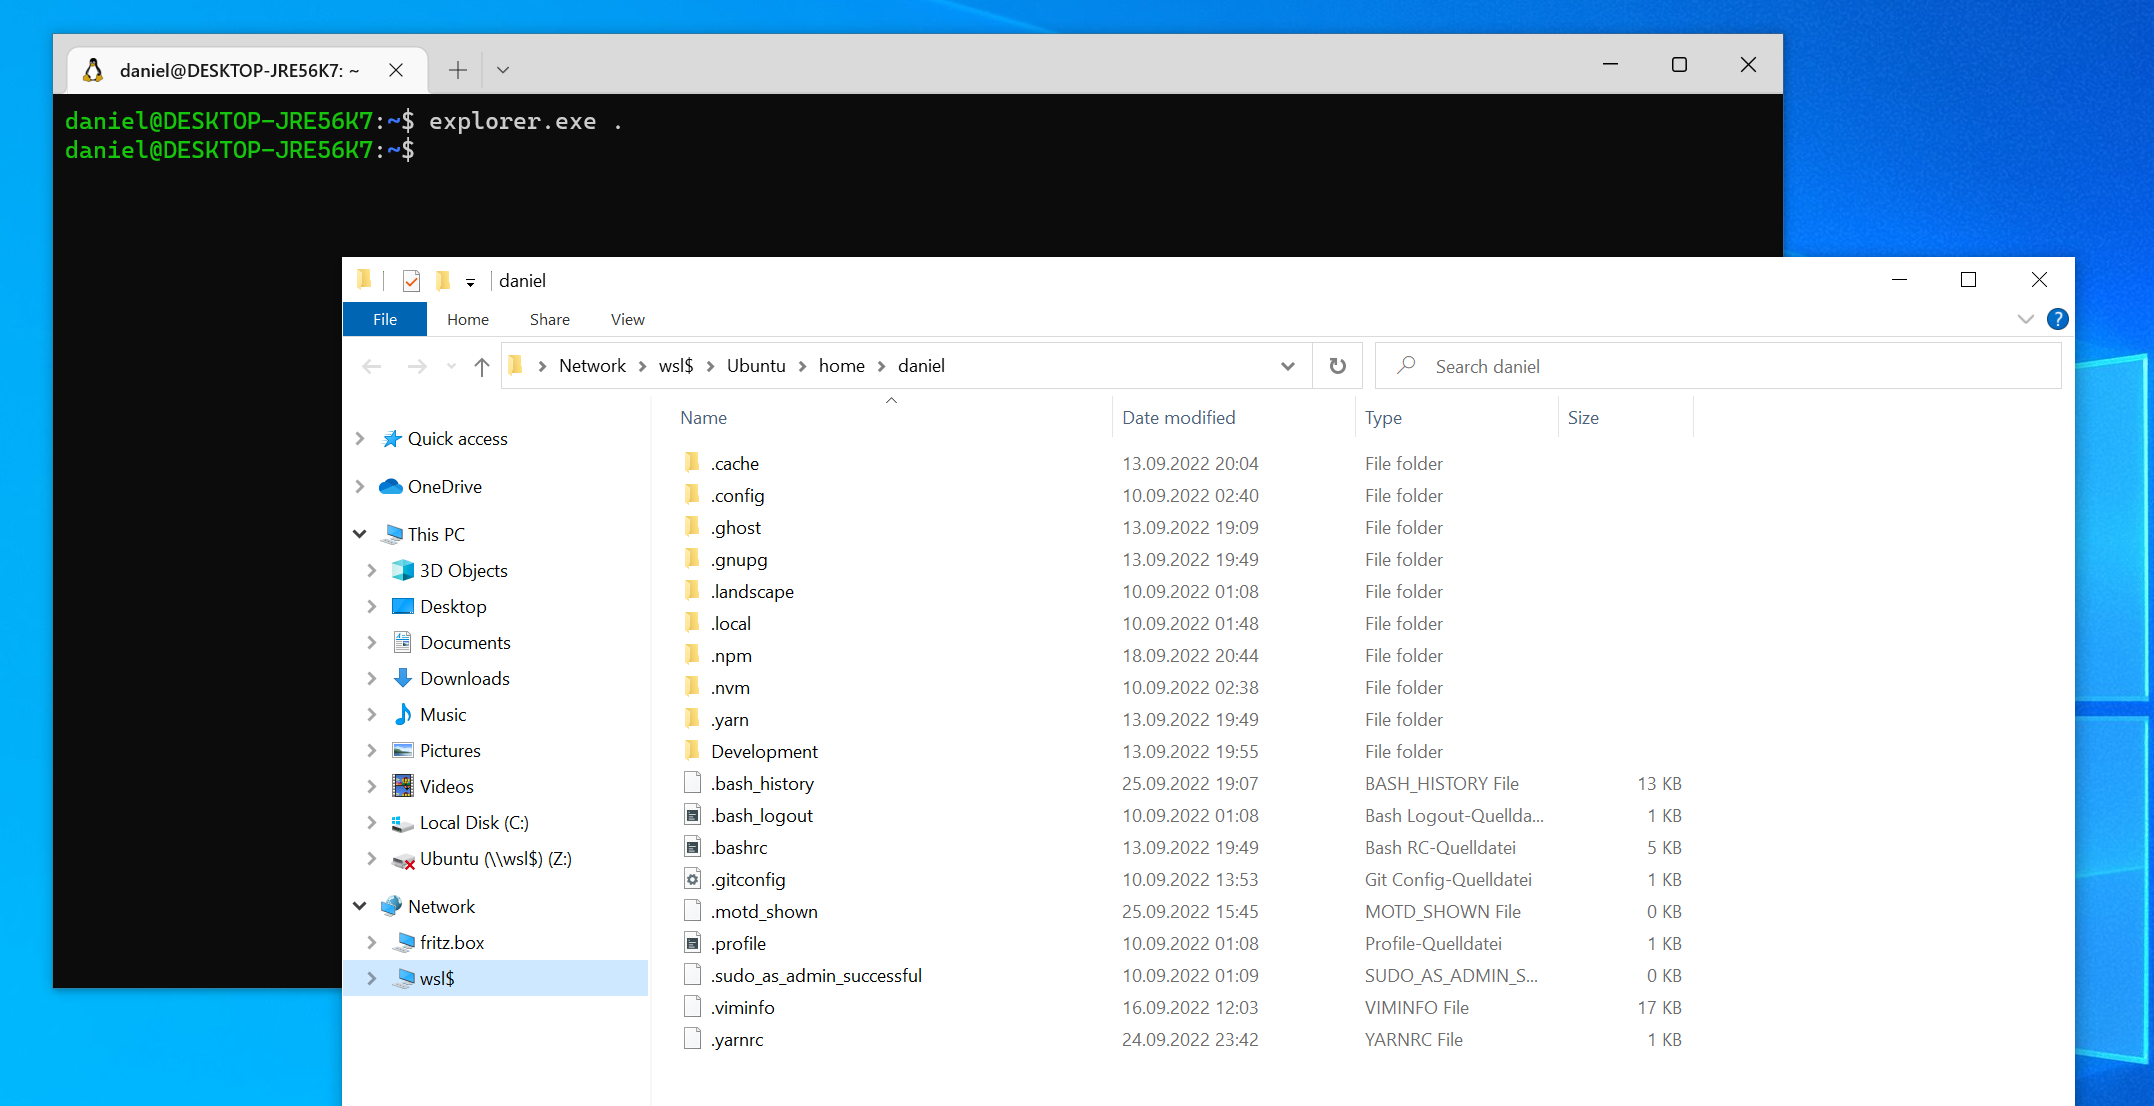 Starting the Windows Explorer to show your Linux home directory